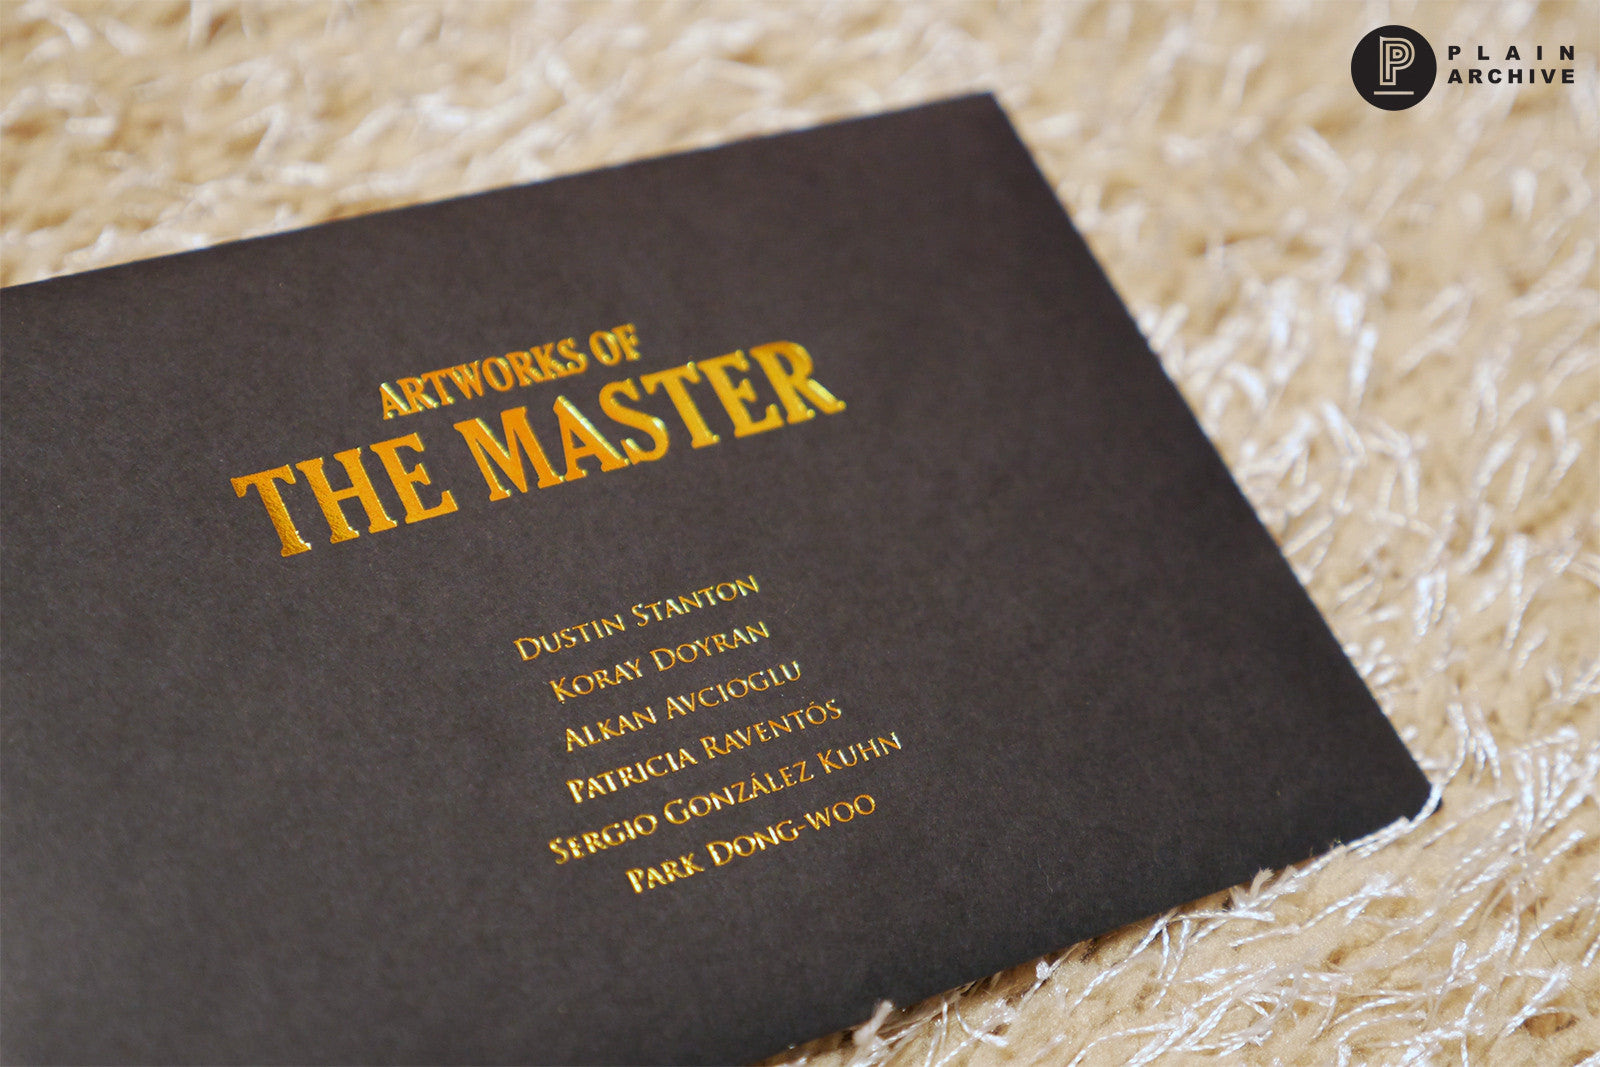 THE MASTER Steelbook with Full Slip